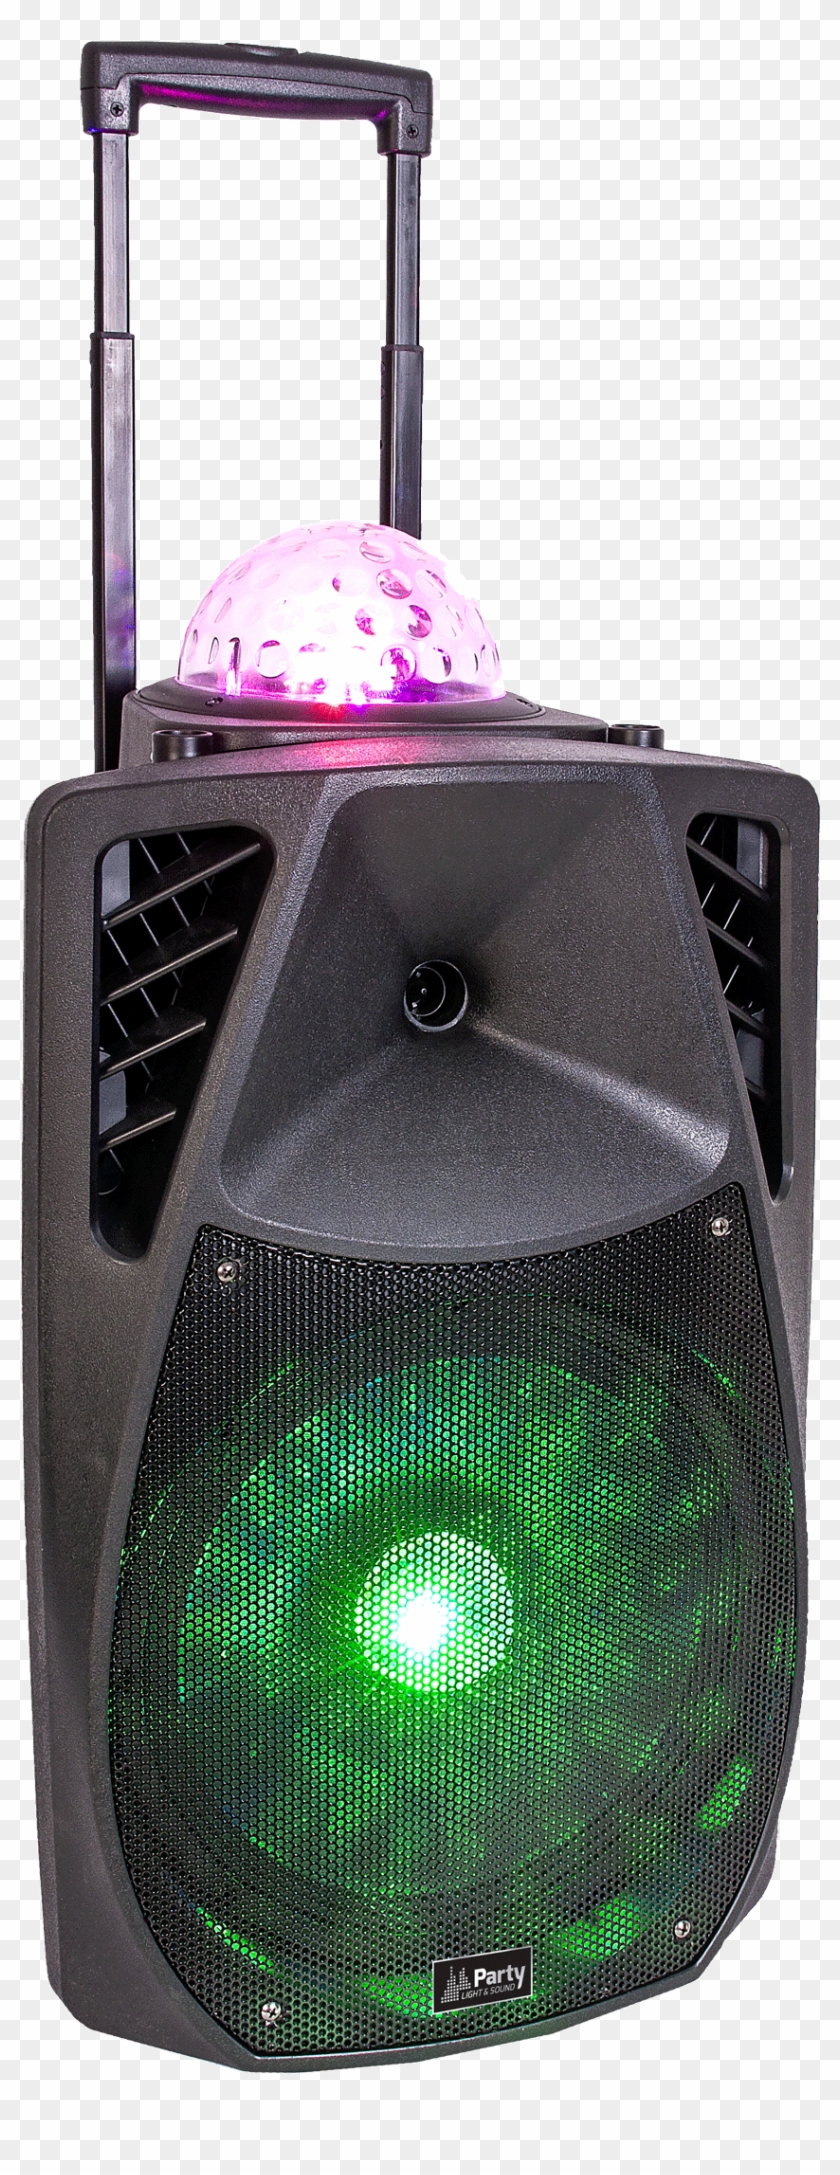 Party-12astro Portable Sound & Light System 12''/30cm - Party 12astro Clipart #3412132